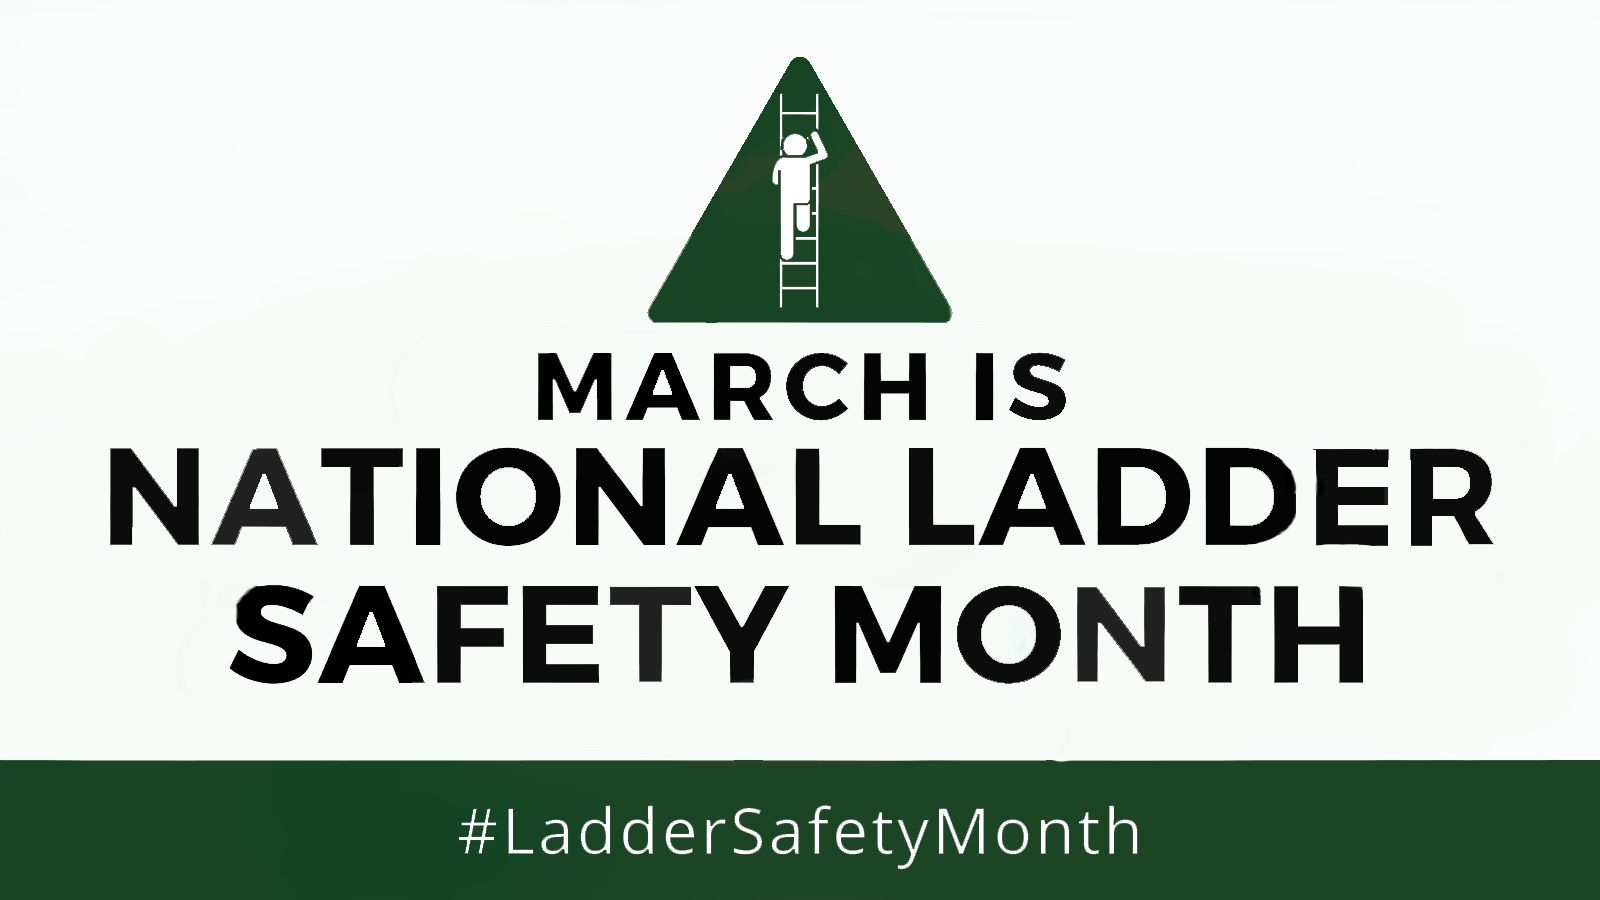 March is national ladder safety month #laddersafetymonth